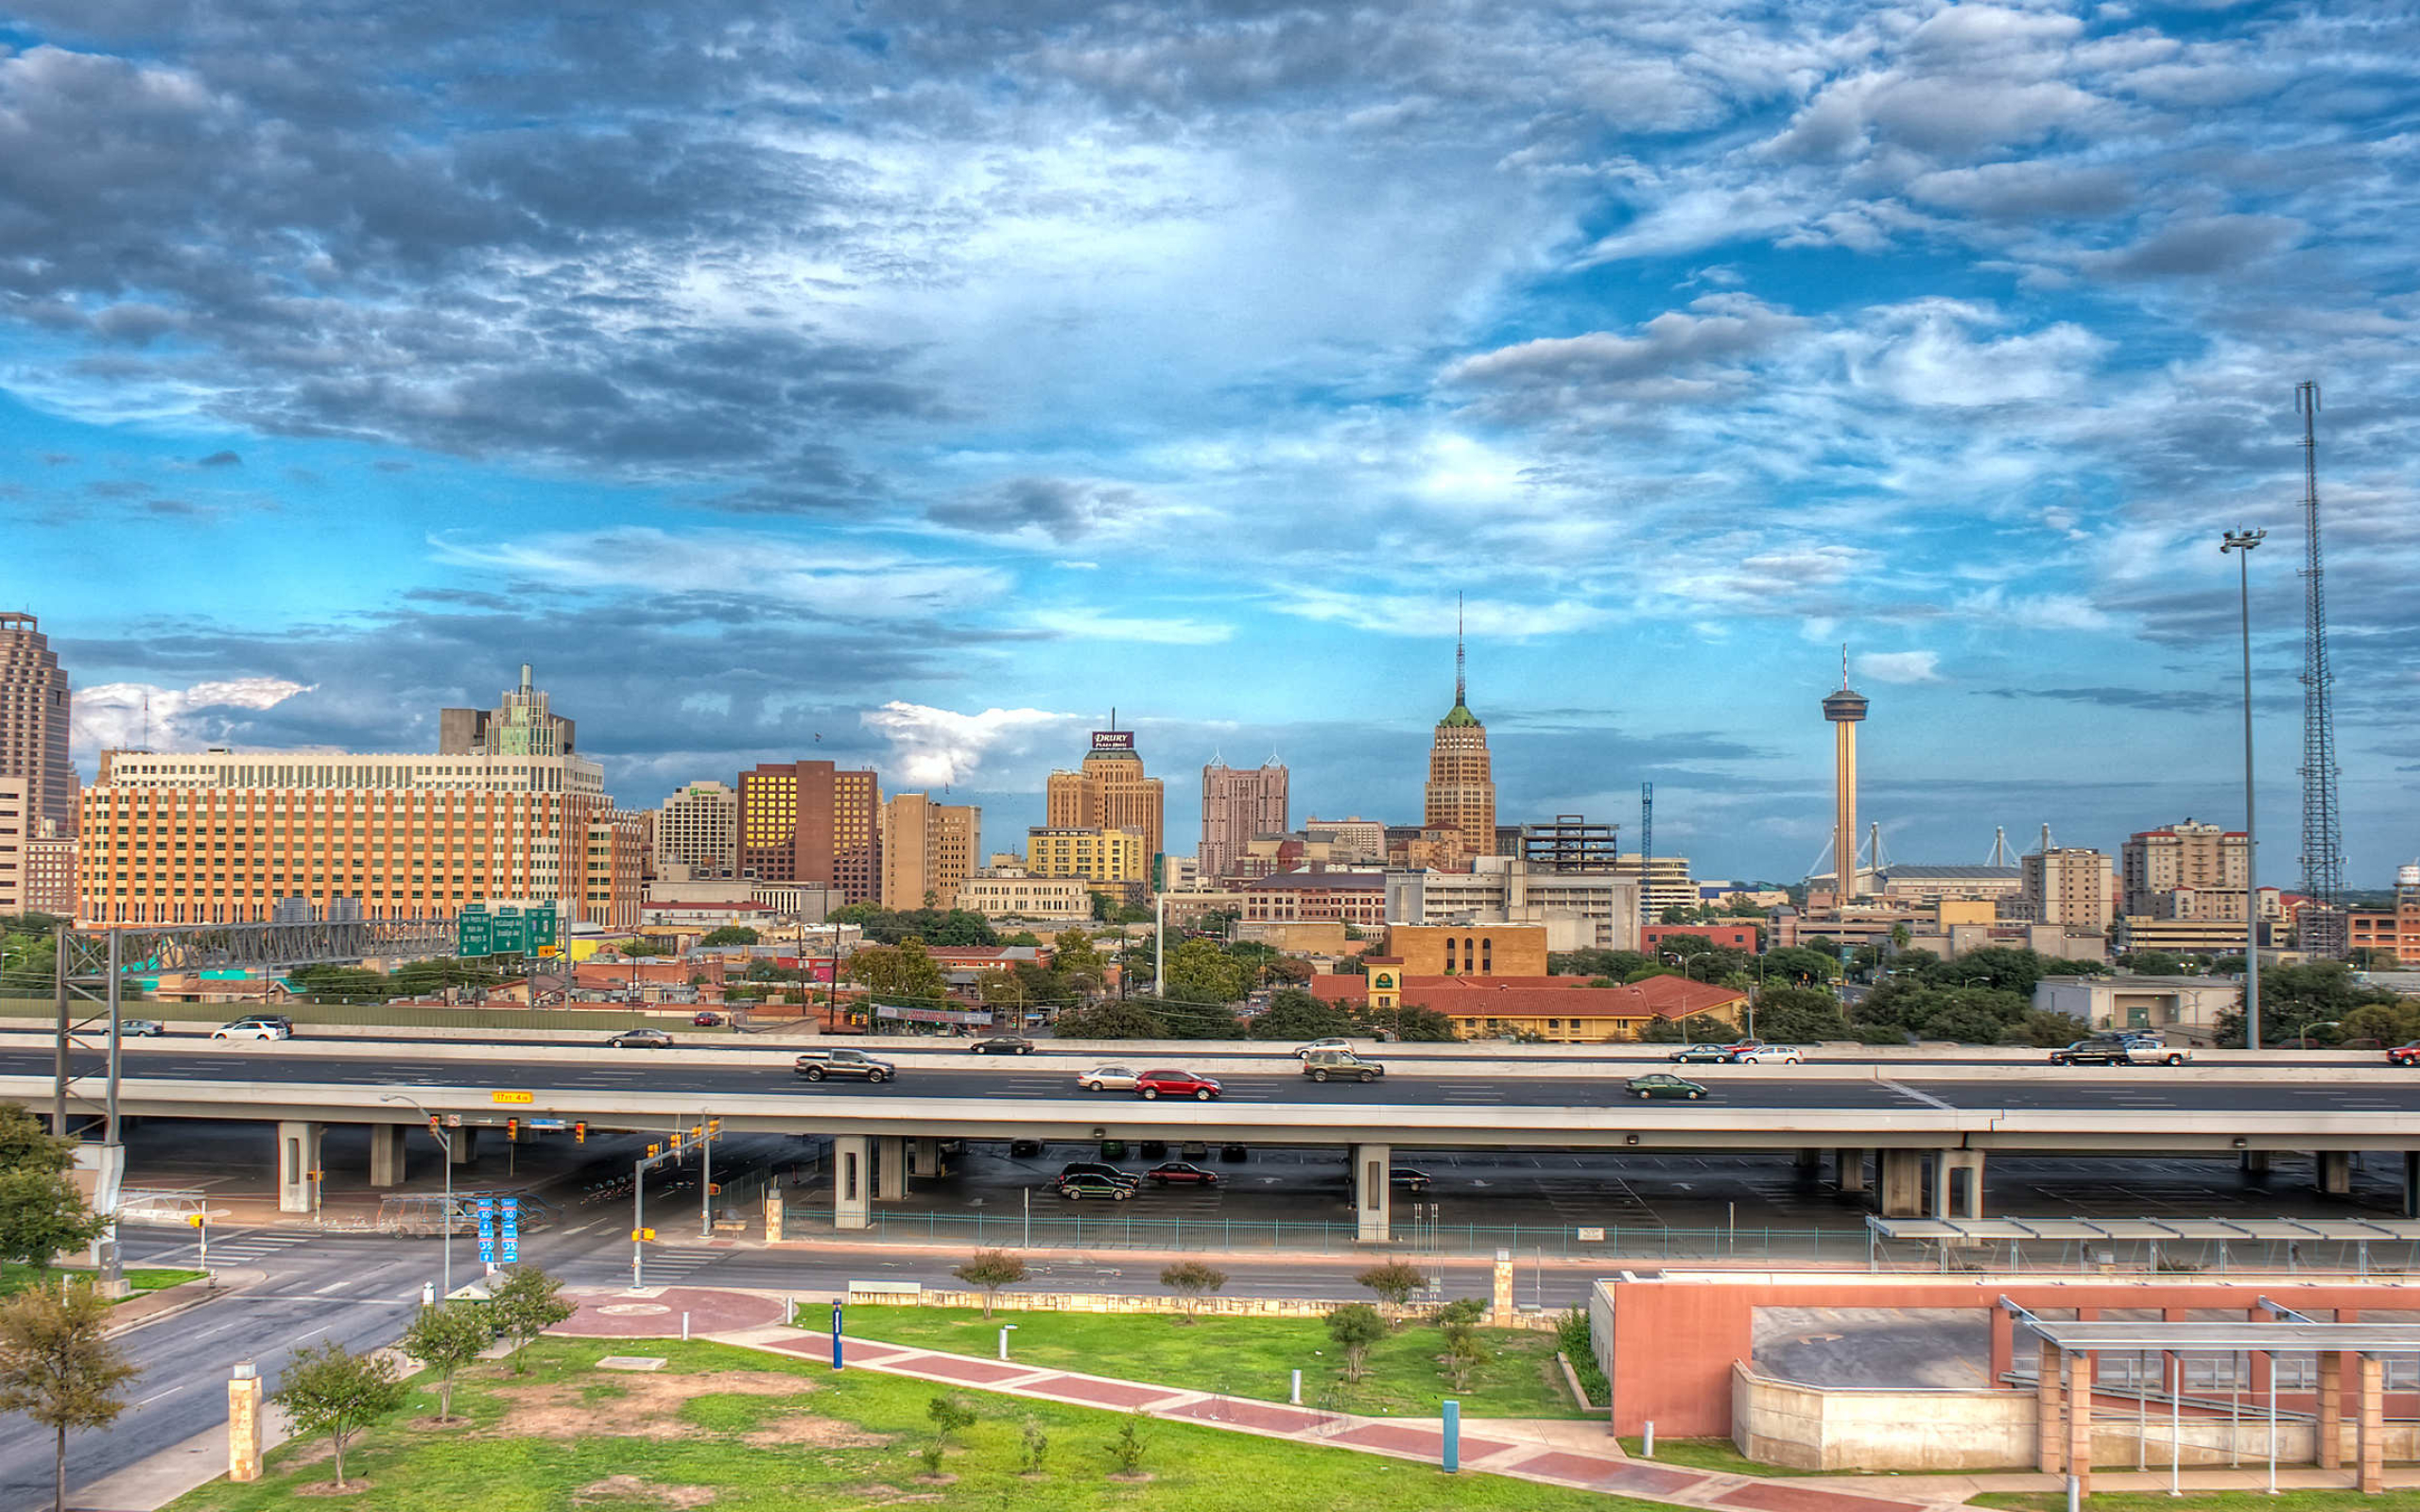 San Antonio wallpapers, Top free backgrounds, Cityscapes and skylines, HD quality, 2560x1600 HD Desktop